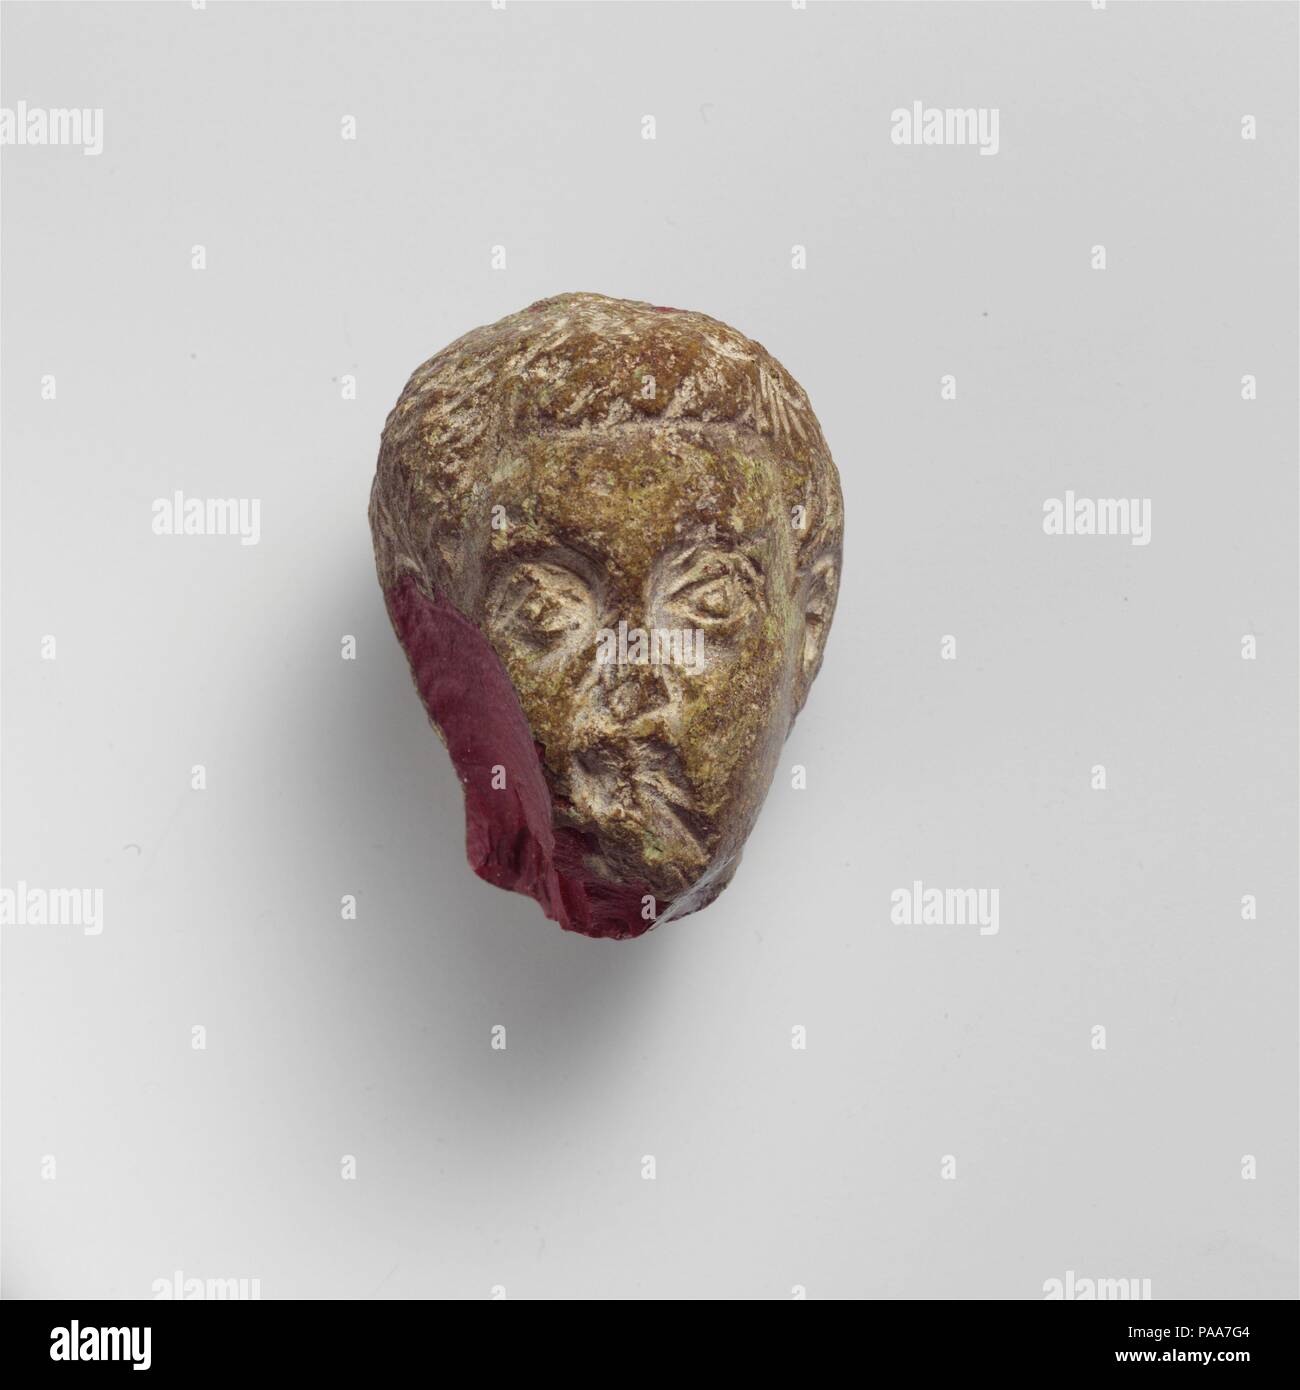 Glass portrait head. Culture: Roman. Dimensions: Height: 1 15/16 in. (5 cm). Date: 1st half of 4th century A.D..  Opaque deep red.  Solid block.  Carved in the round: male head with short wavy hair and fringe across forehead, arched brows, large eyes, and clean shaven face.  Broken, with large unweathered chip in proper right side of face and side of head, and weathered chips to nose, mouth, and chin; green copper weathering surface.  This small portrait head may represent a prince from the family of Constantine I. Museum: Metropolitan Museum of Art, New York, USA. Stock Photo